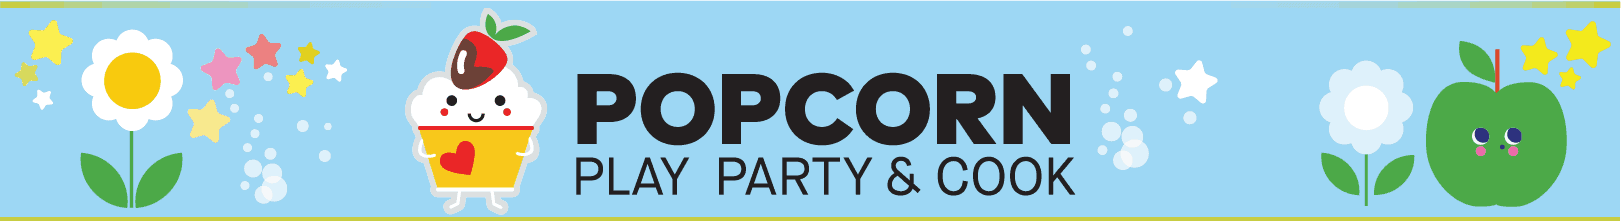 Popcorn- Play, Party & Cook Logo